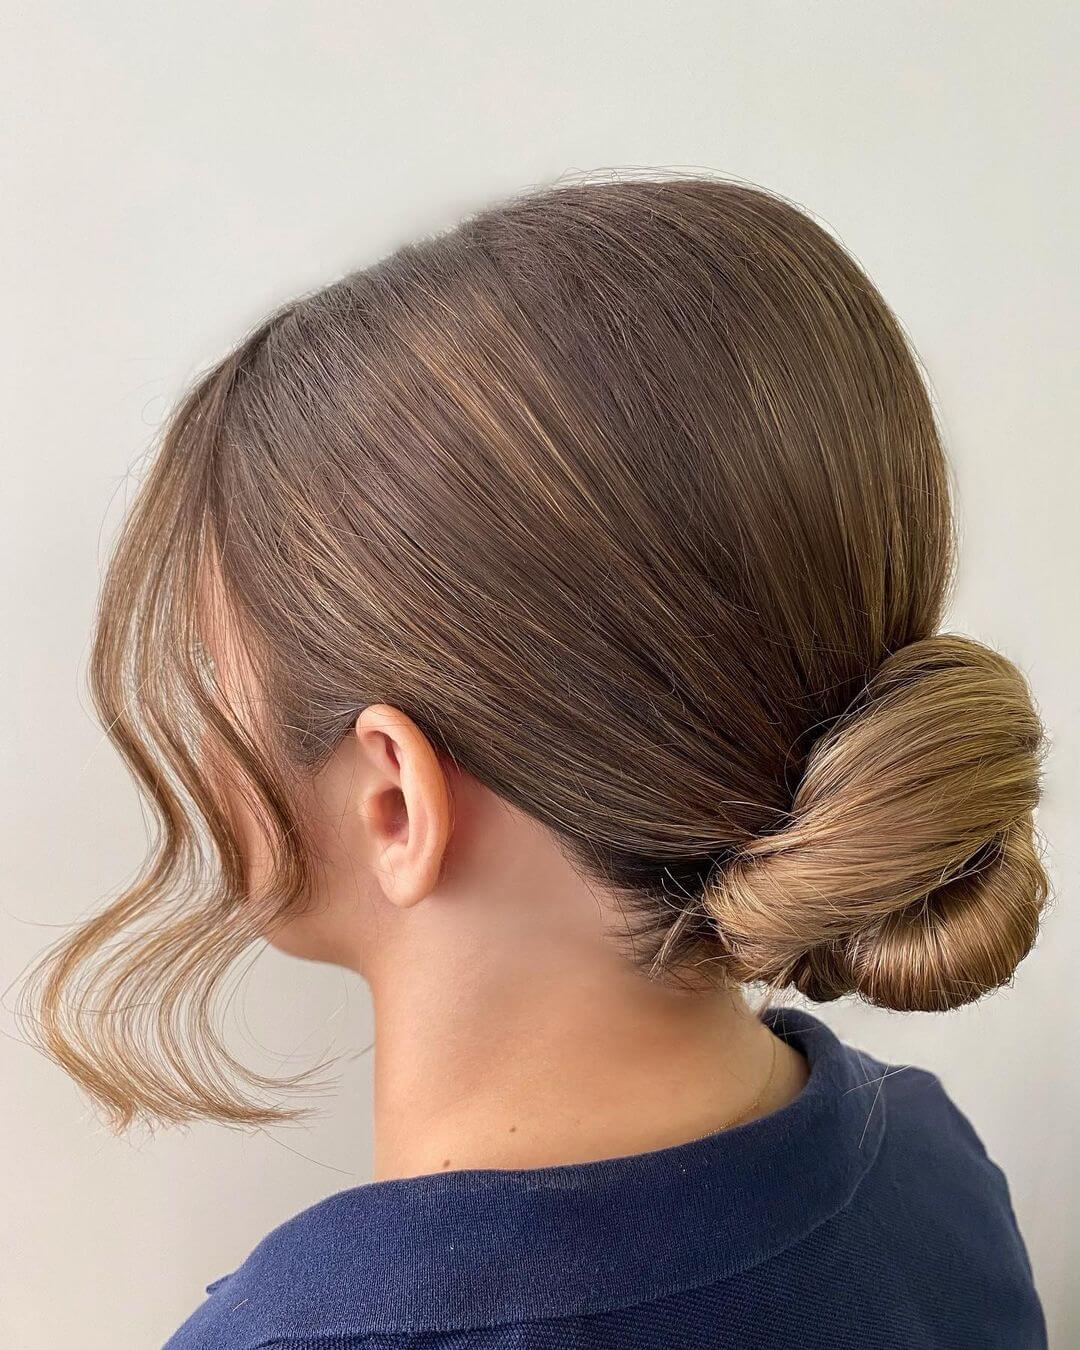 Office Hairstyle For Woman with Long Hair Okay With The Bun